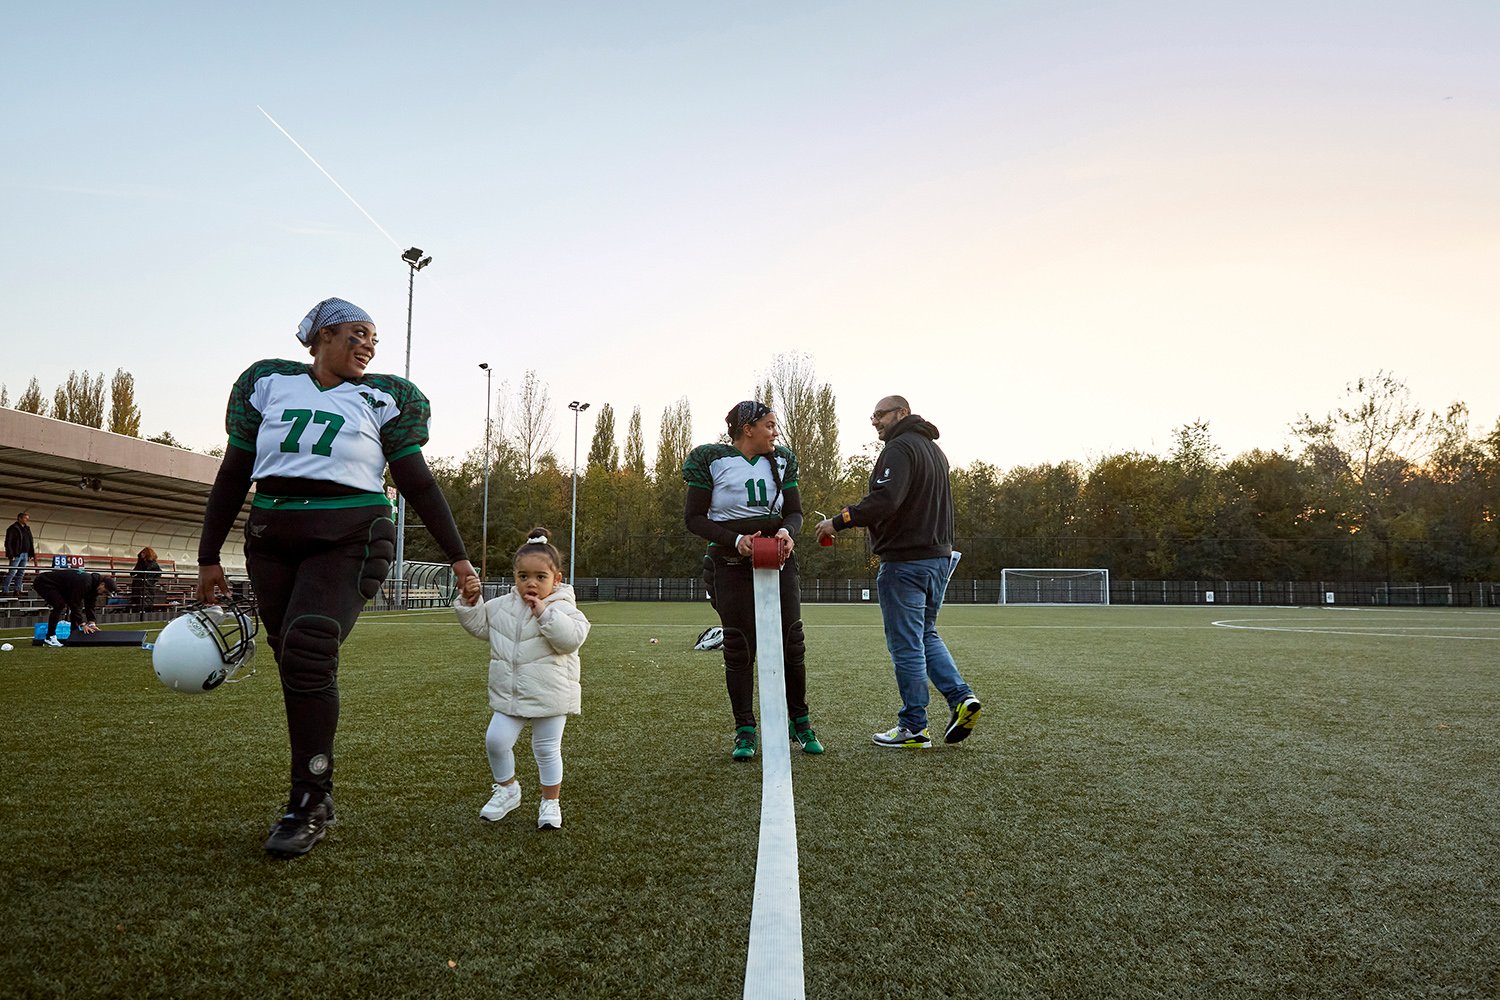  Marjaline, center for the Rotterdam Ravens, walks off the field with the daughter of a friend after a game against the Utrecht Wolverines, Rotterdam, NL, 2021. Behind her, Lisa, one of the Ravens' tight ends, chats with the game's live commentator w